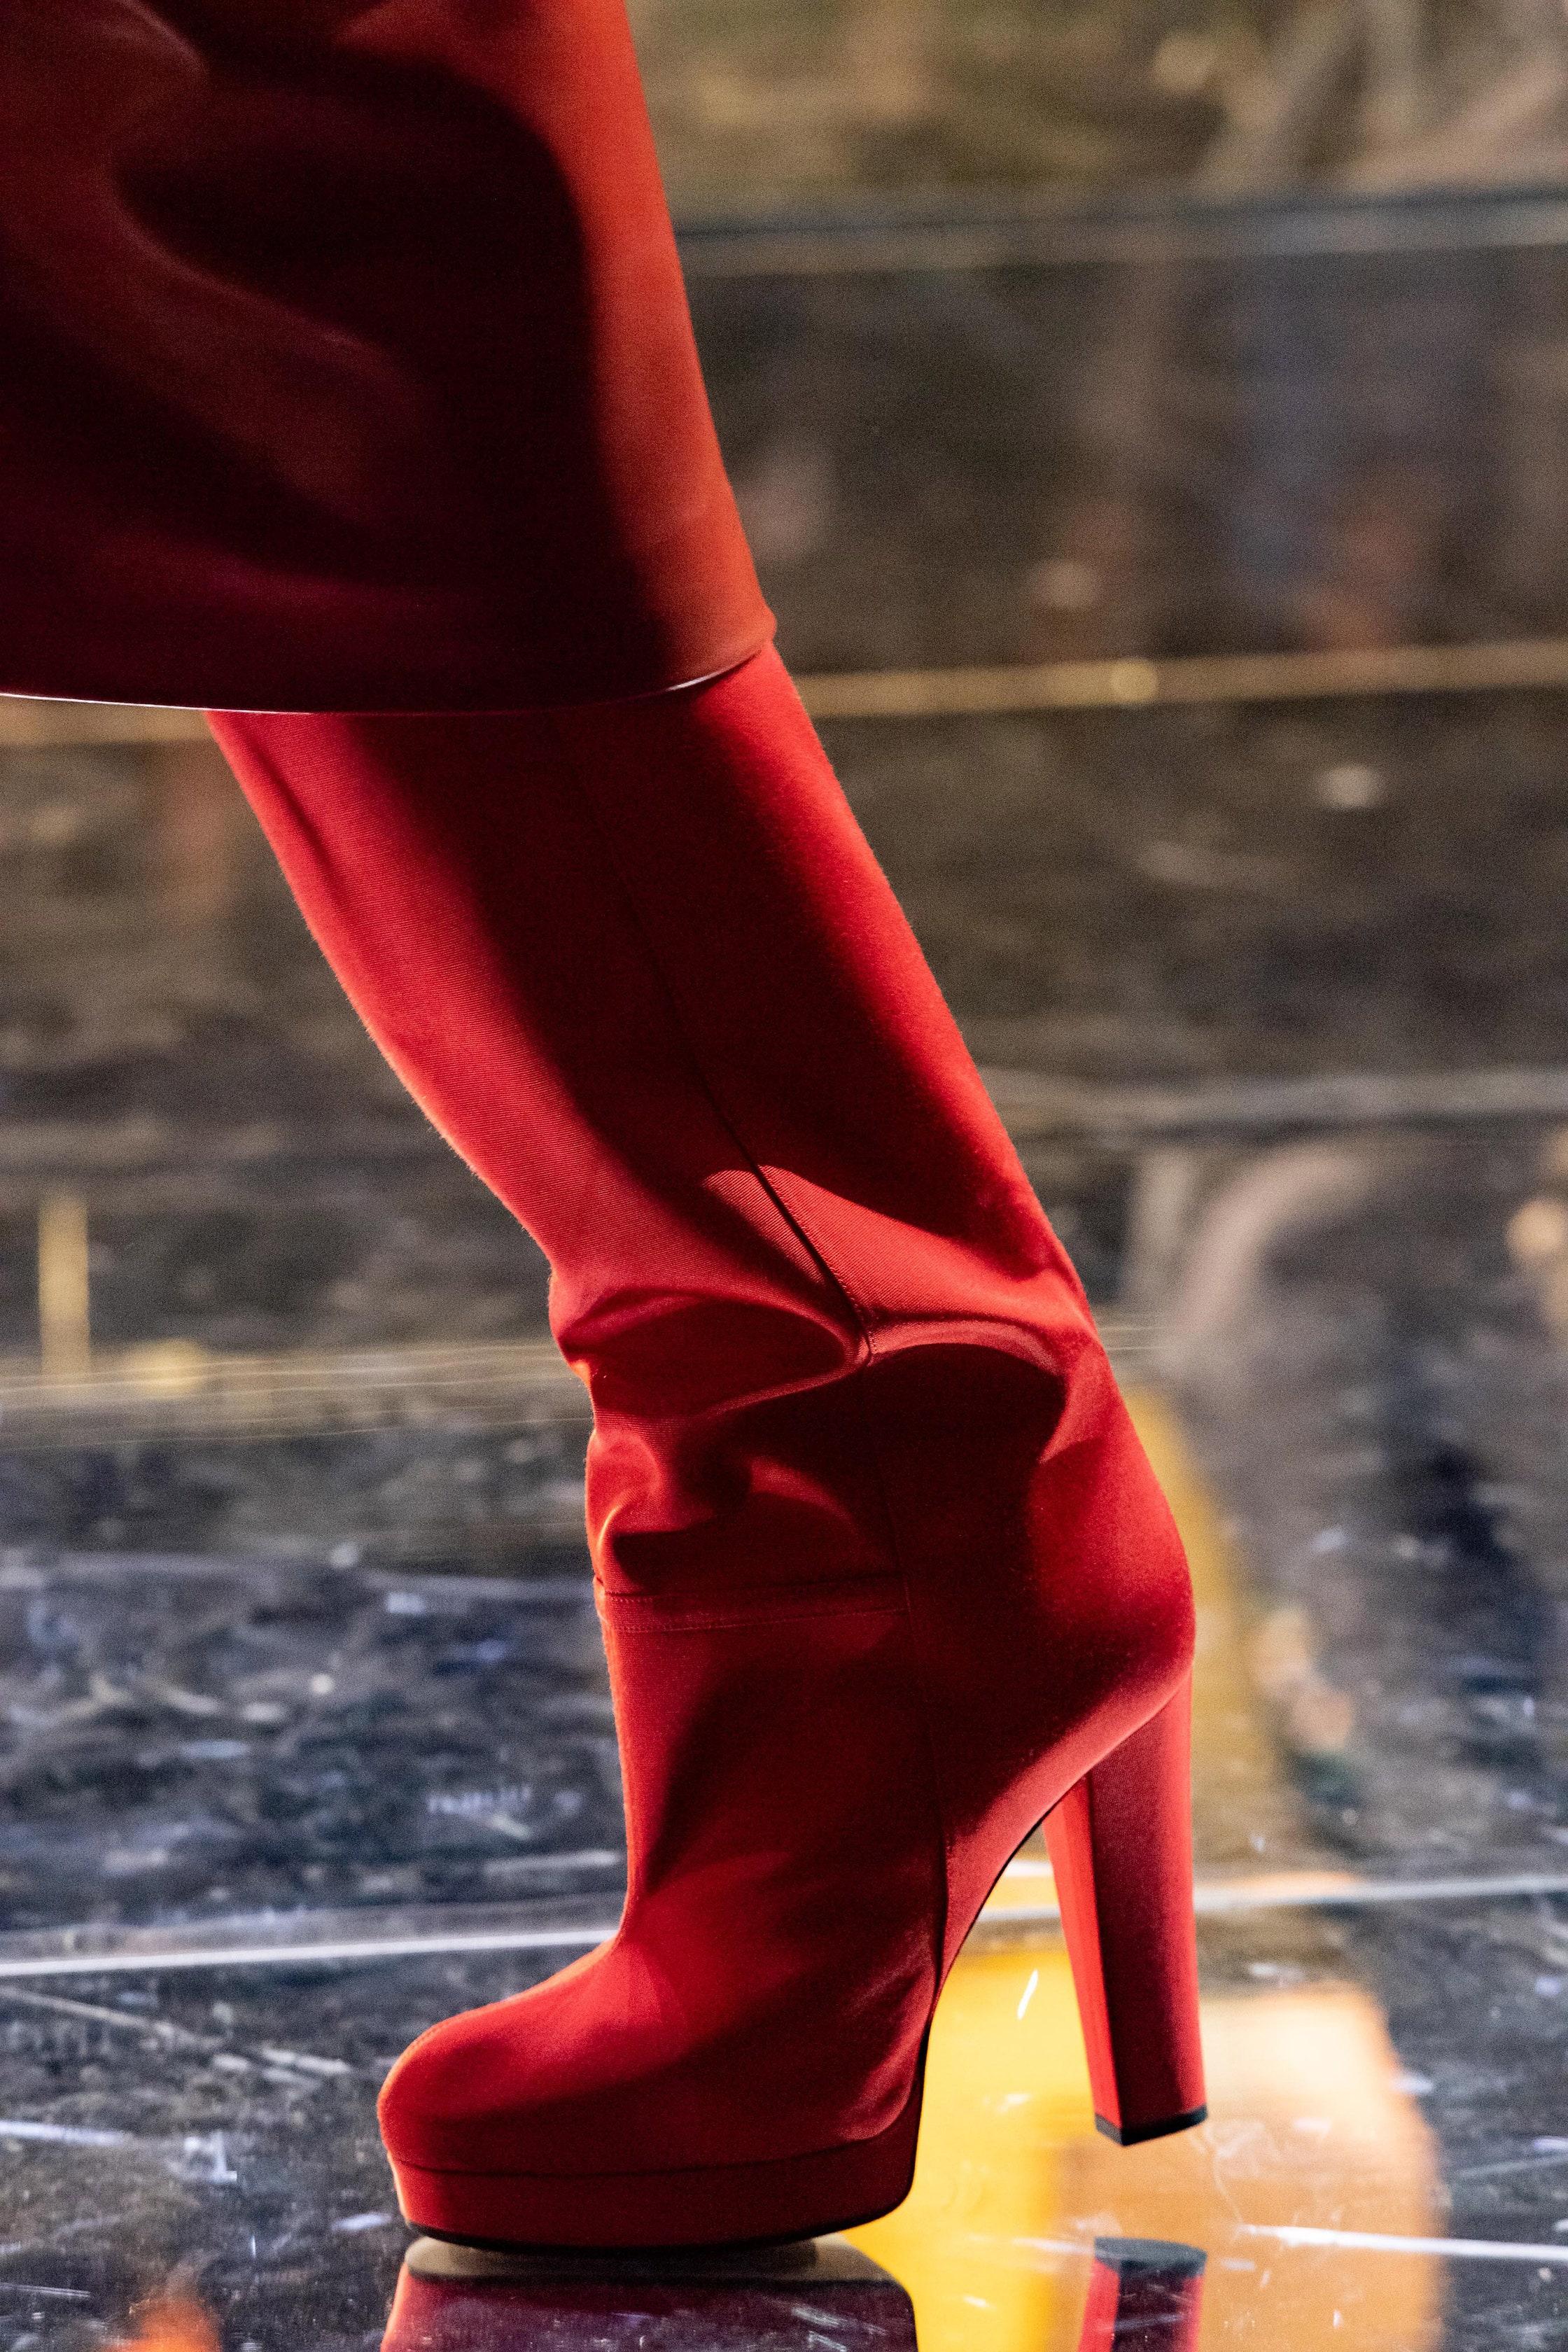 New With Box Gucci Fall 2019 Alessandro Michele Red Boots Sz 38.5 For Sale 8